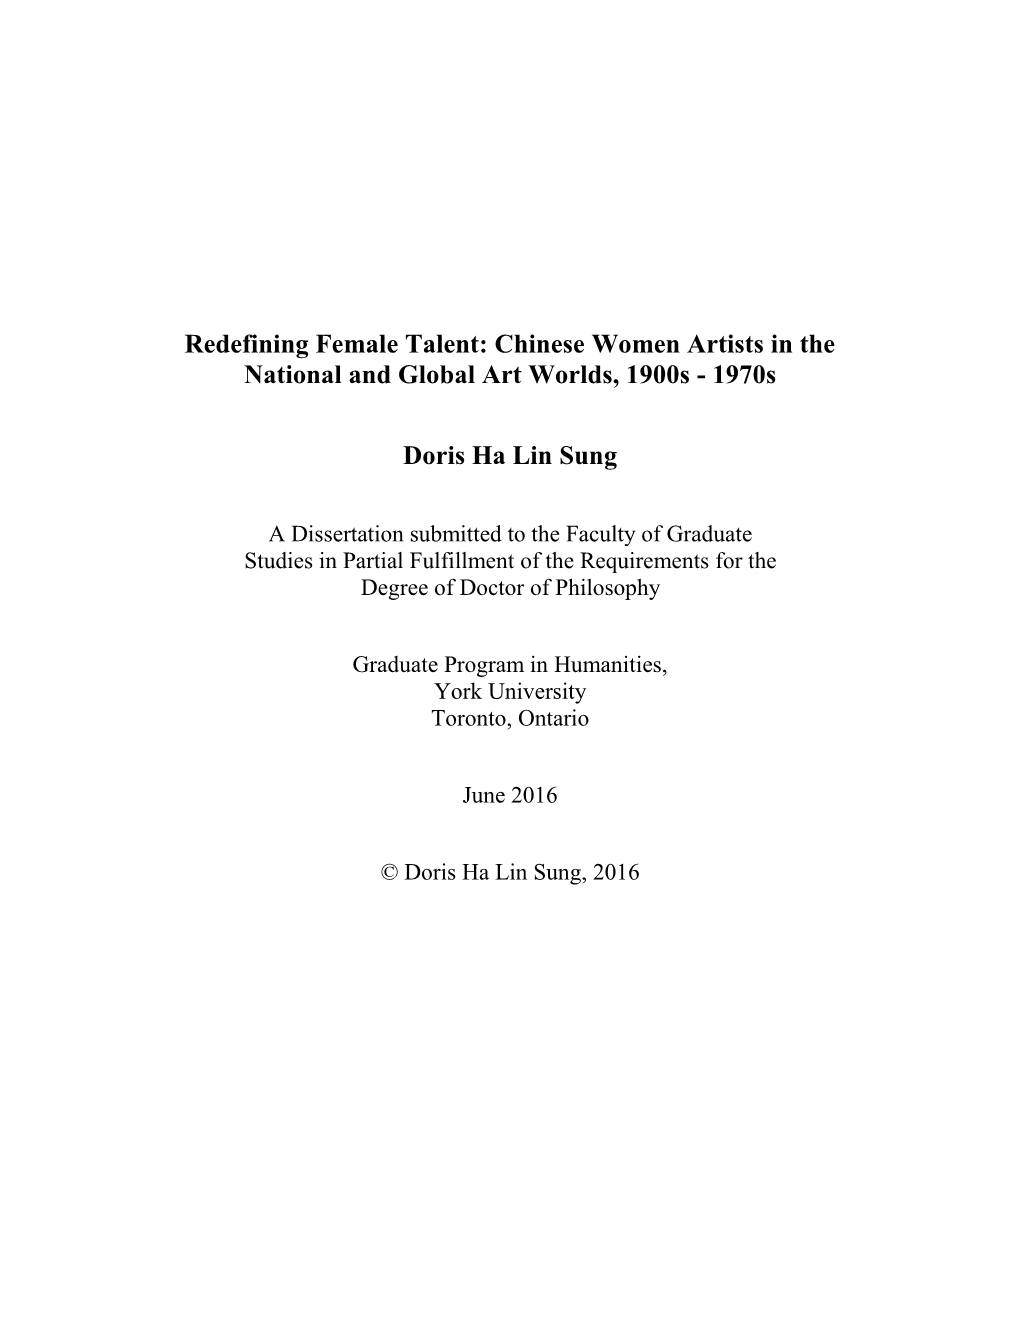 Chinese Women Artists in the National and Global Art Worlds, 1900S - 1970S